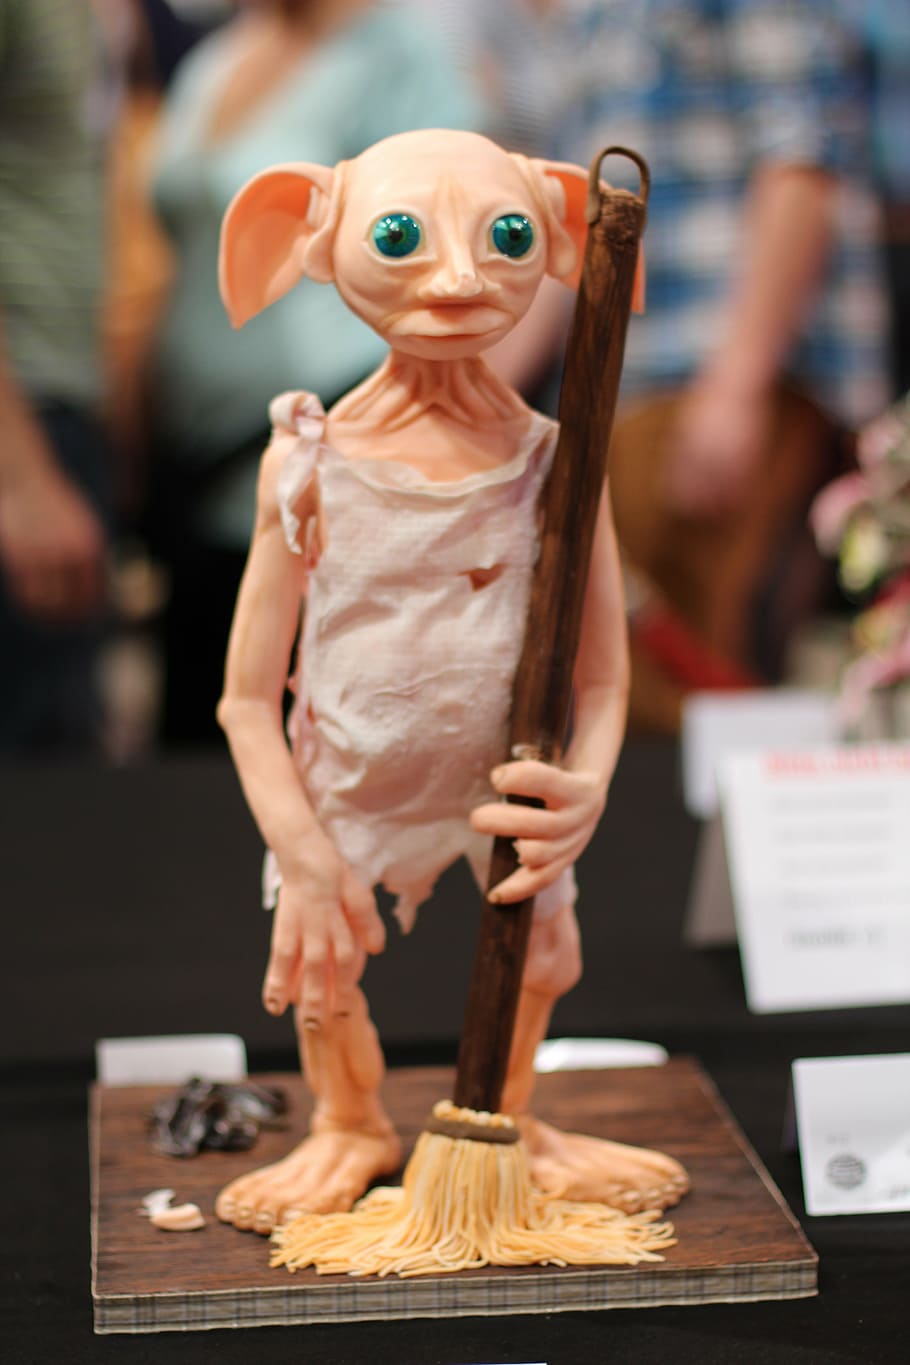 Dobby the house elf wallpaper by Anaspookypicco  Download on ZEDGE   ad13